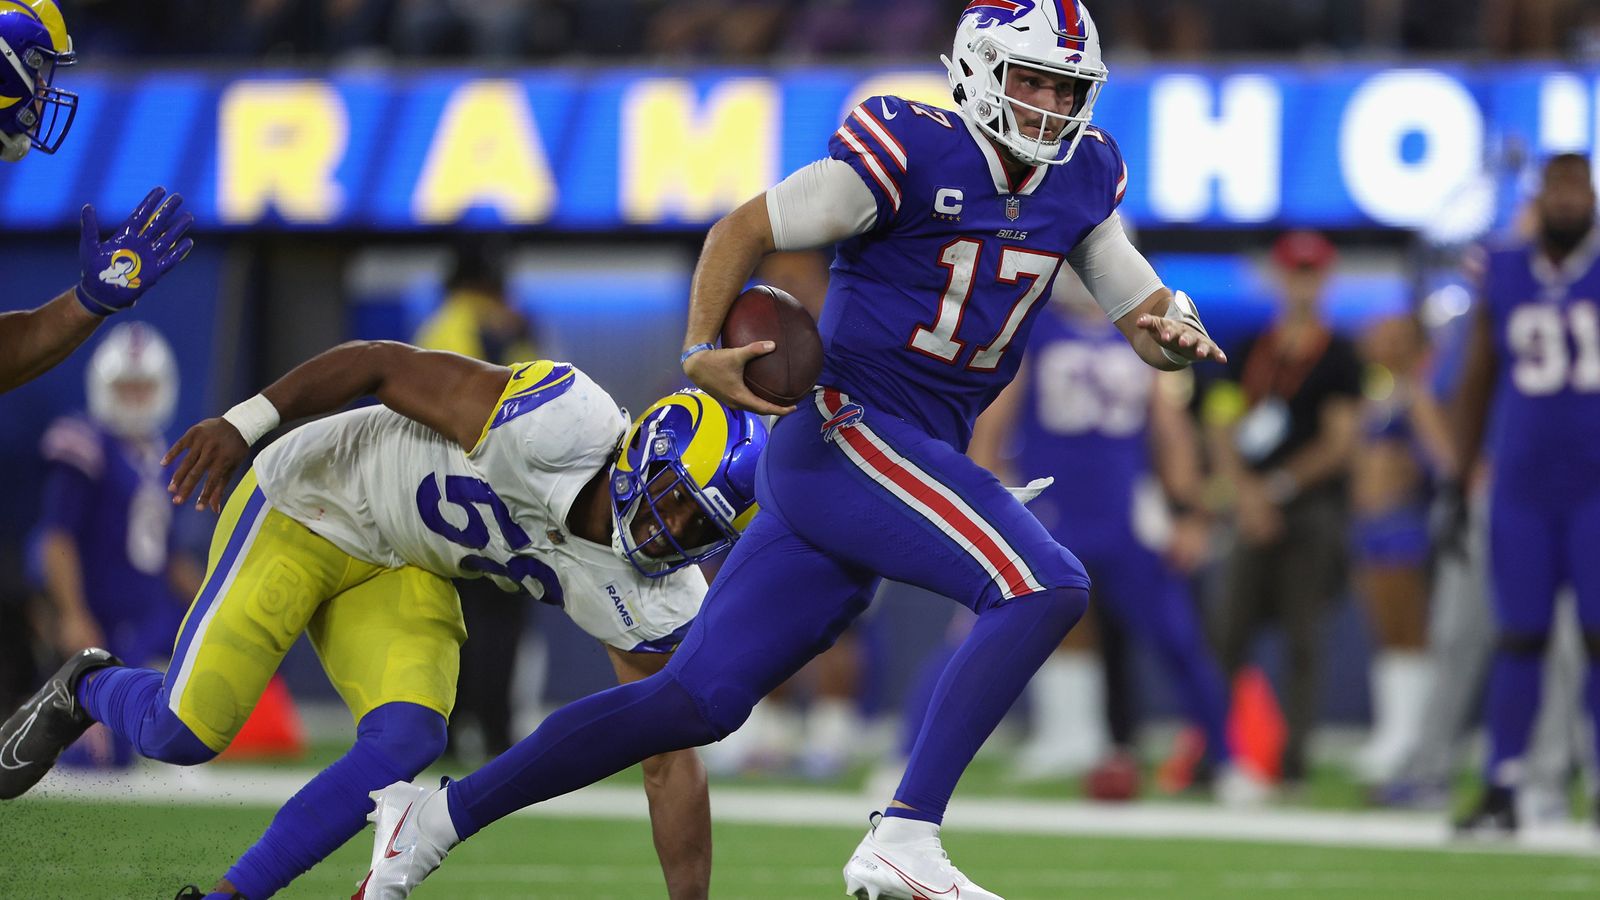 Buffalo Bills 31-10 Los Angeles Rams: Josh Allen throws three touchdowns as the Bills rout the Rams on opening night